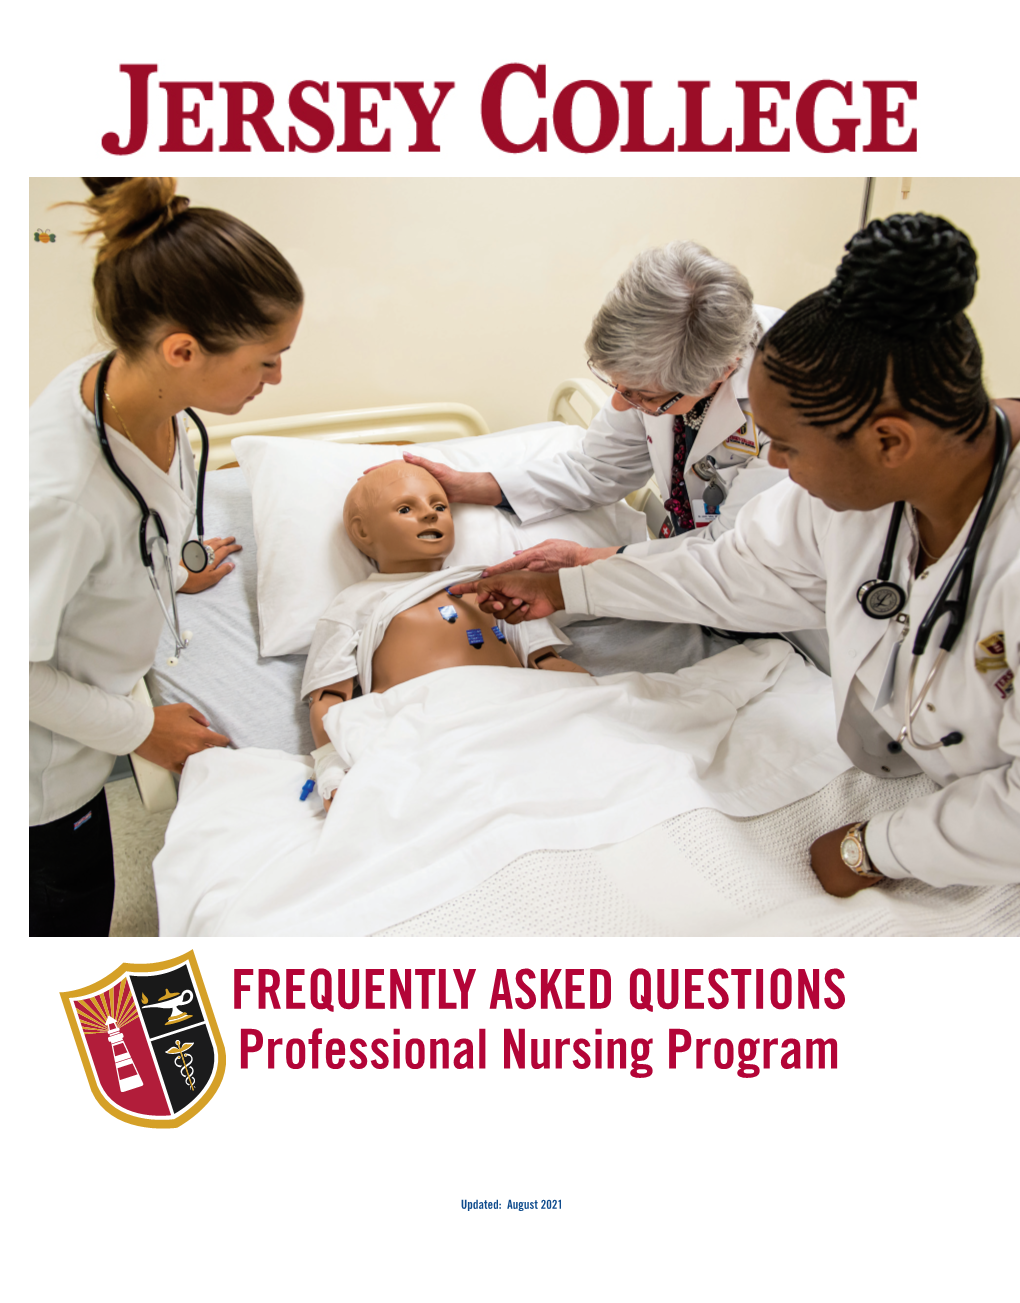 Nurse Residency Track) and Other Professional Nursing Tracks? A